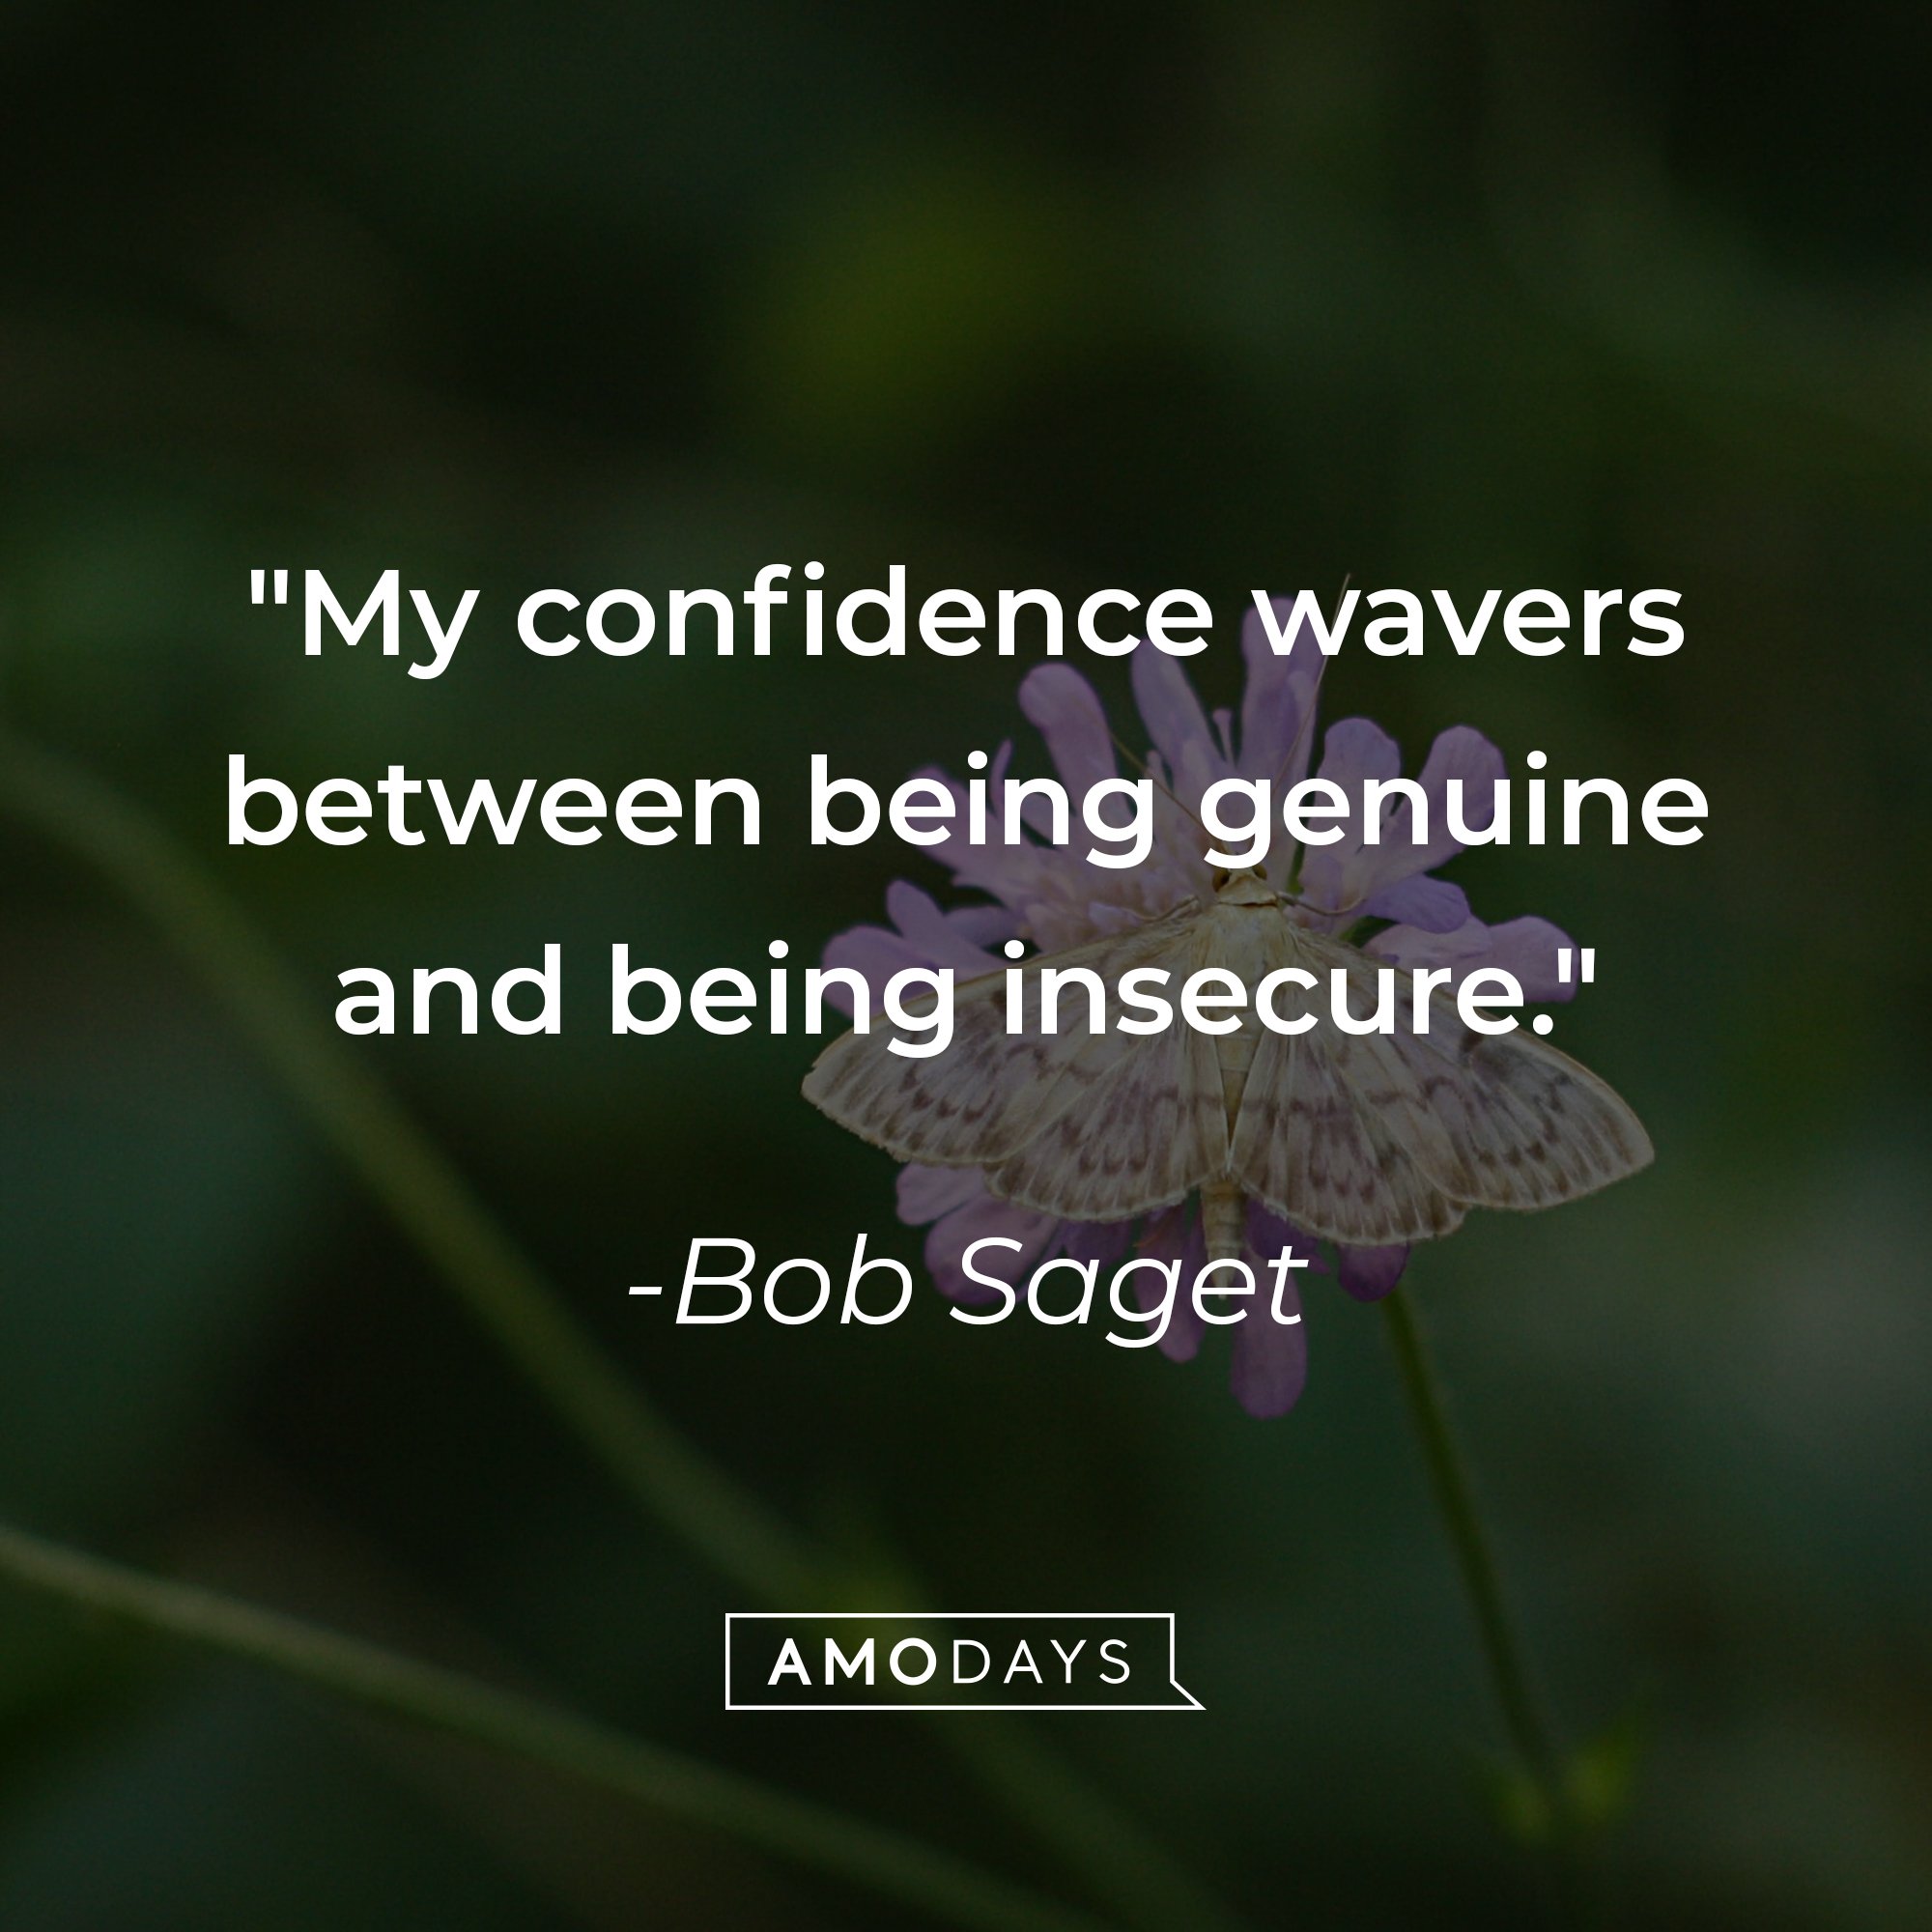  Bob Saget’s quote: "My confidence wavers between being genuine and being insecure." | Image: AmoDays